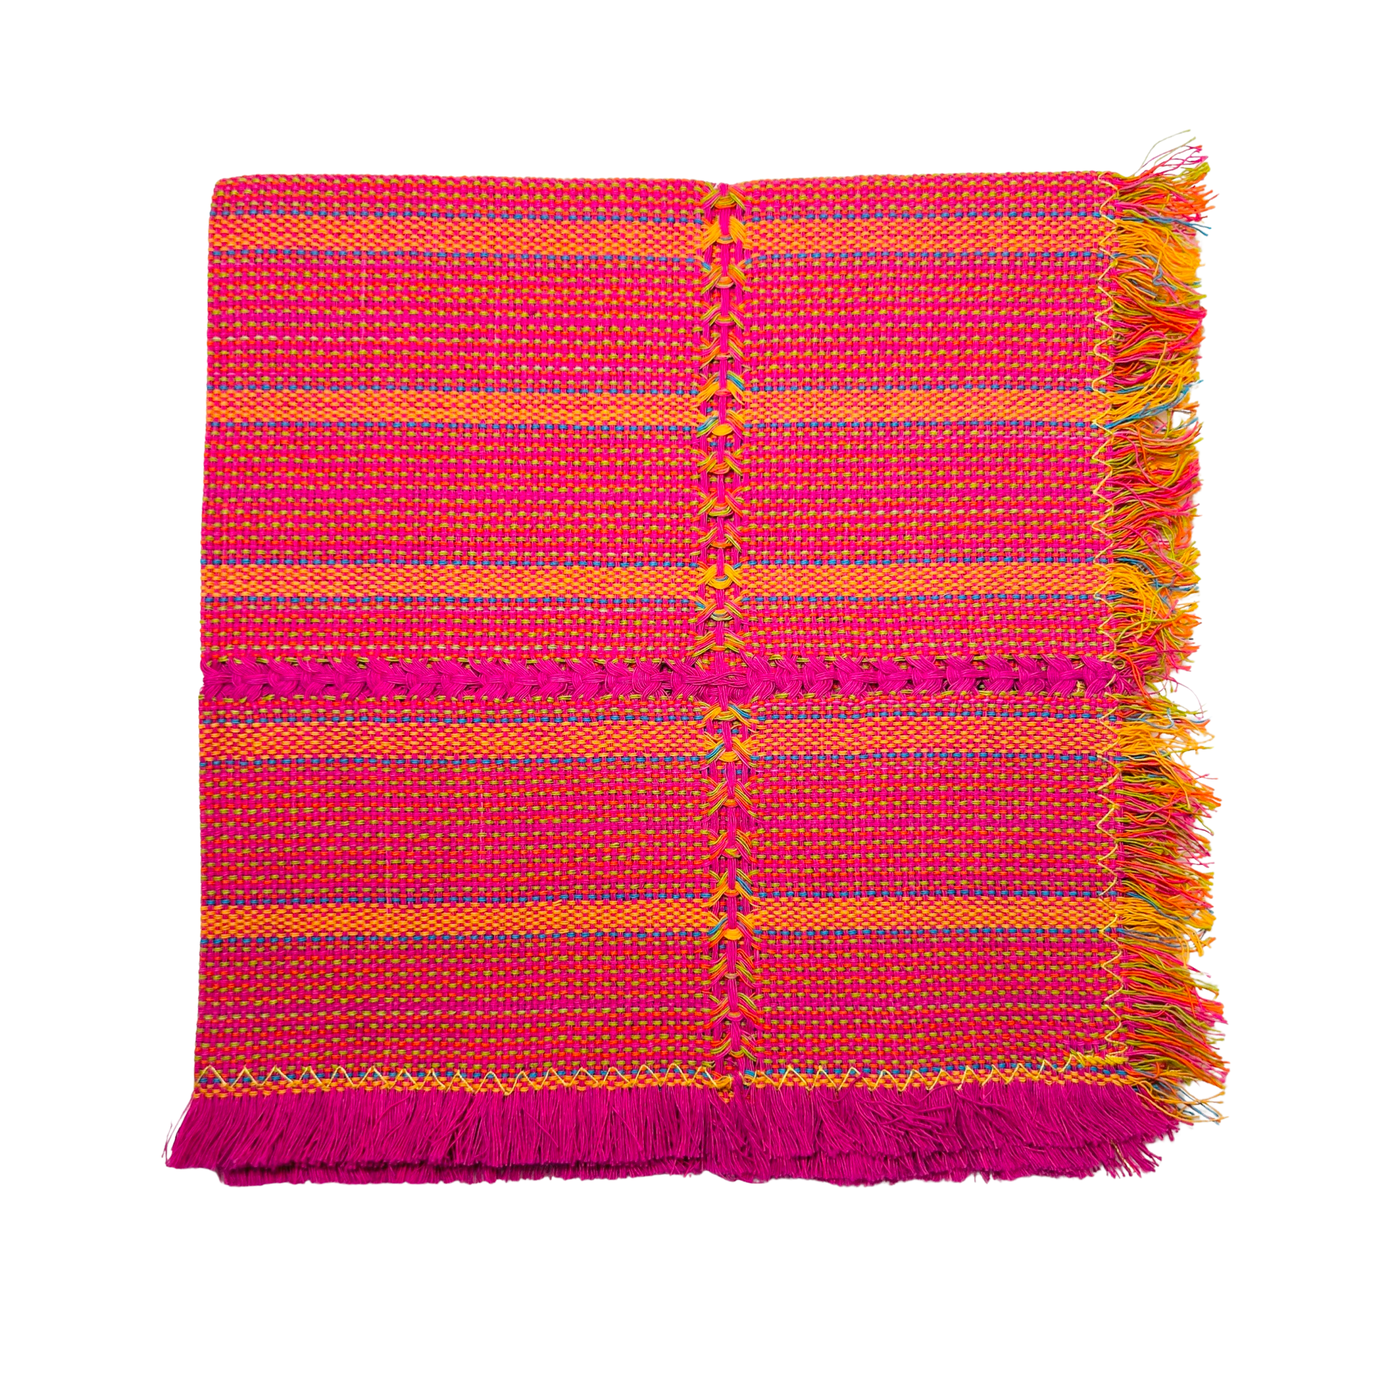 pink, orange and light blue striped handwoven napkin folded in quarters.